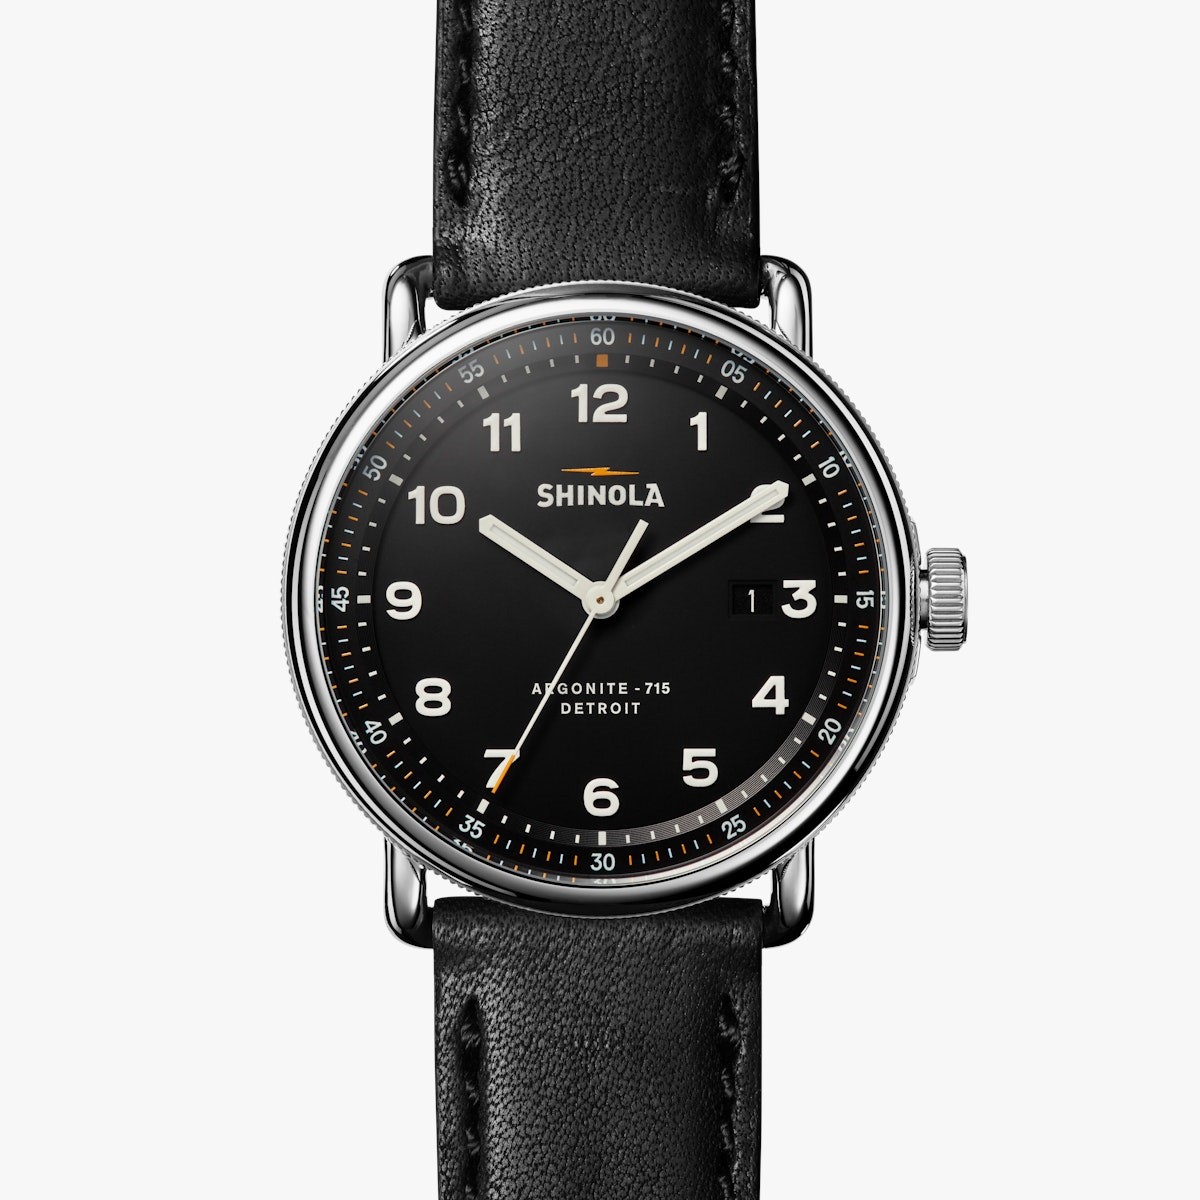 SHINOLA THE CANFIELD MODEL C56 43MM (0120266180)Quartz, Stainless Steel, Black Leather Strap